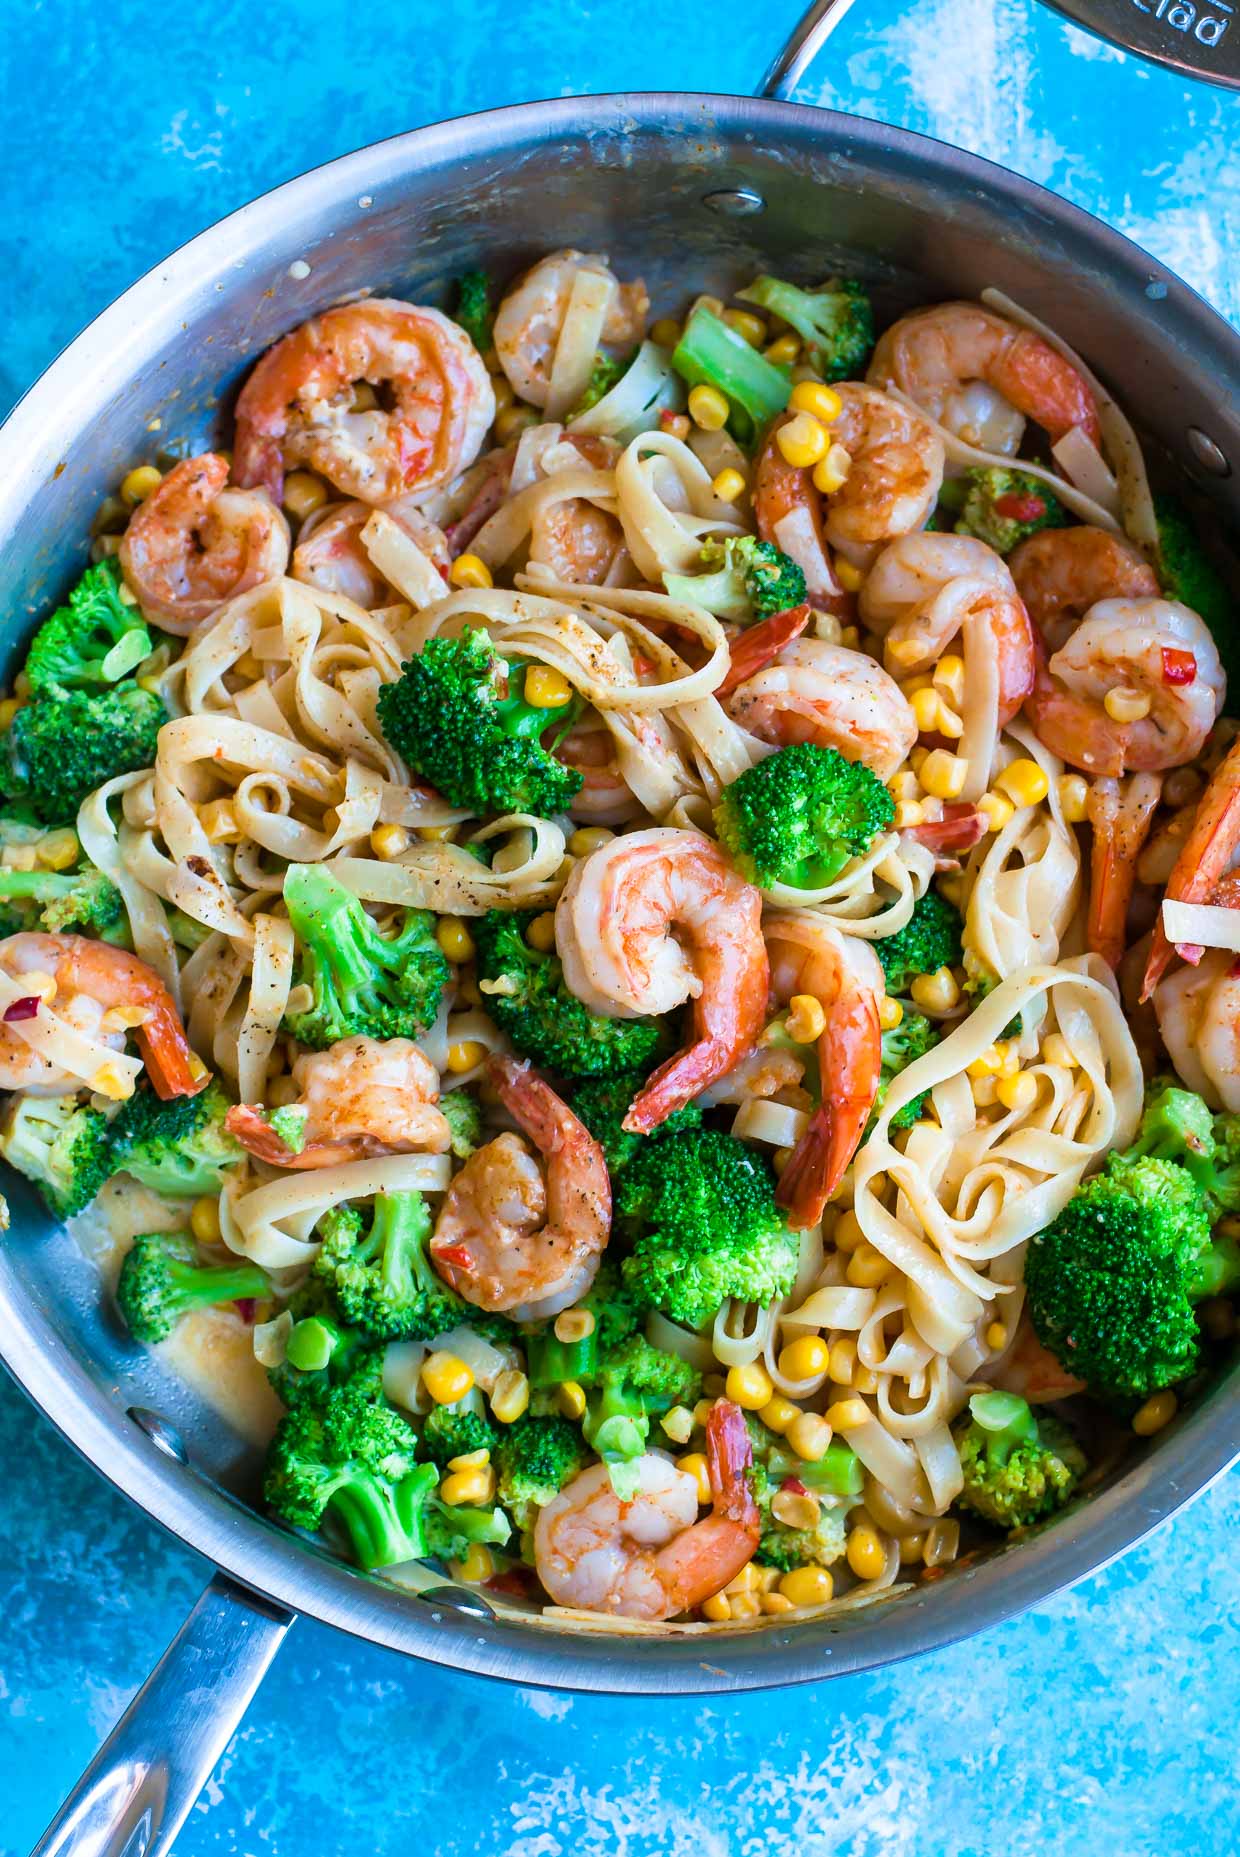 Cajun Shrimp Pasta tossed in a zesty lemon cream sauce with lots of veggies: this crazy colorful pasta dish is fast and flavorful!